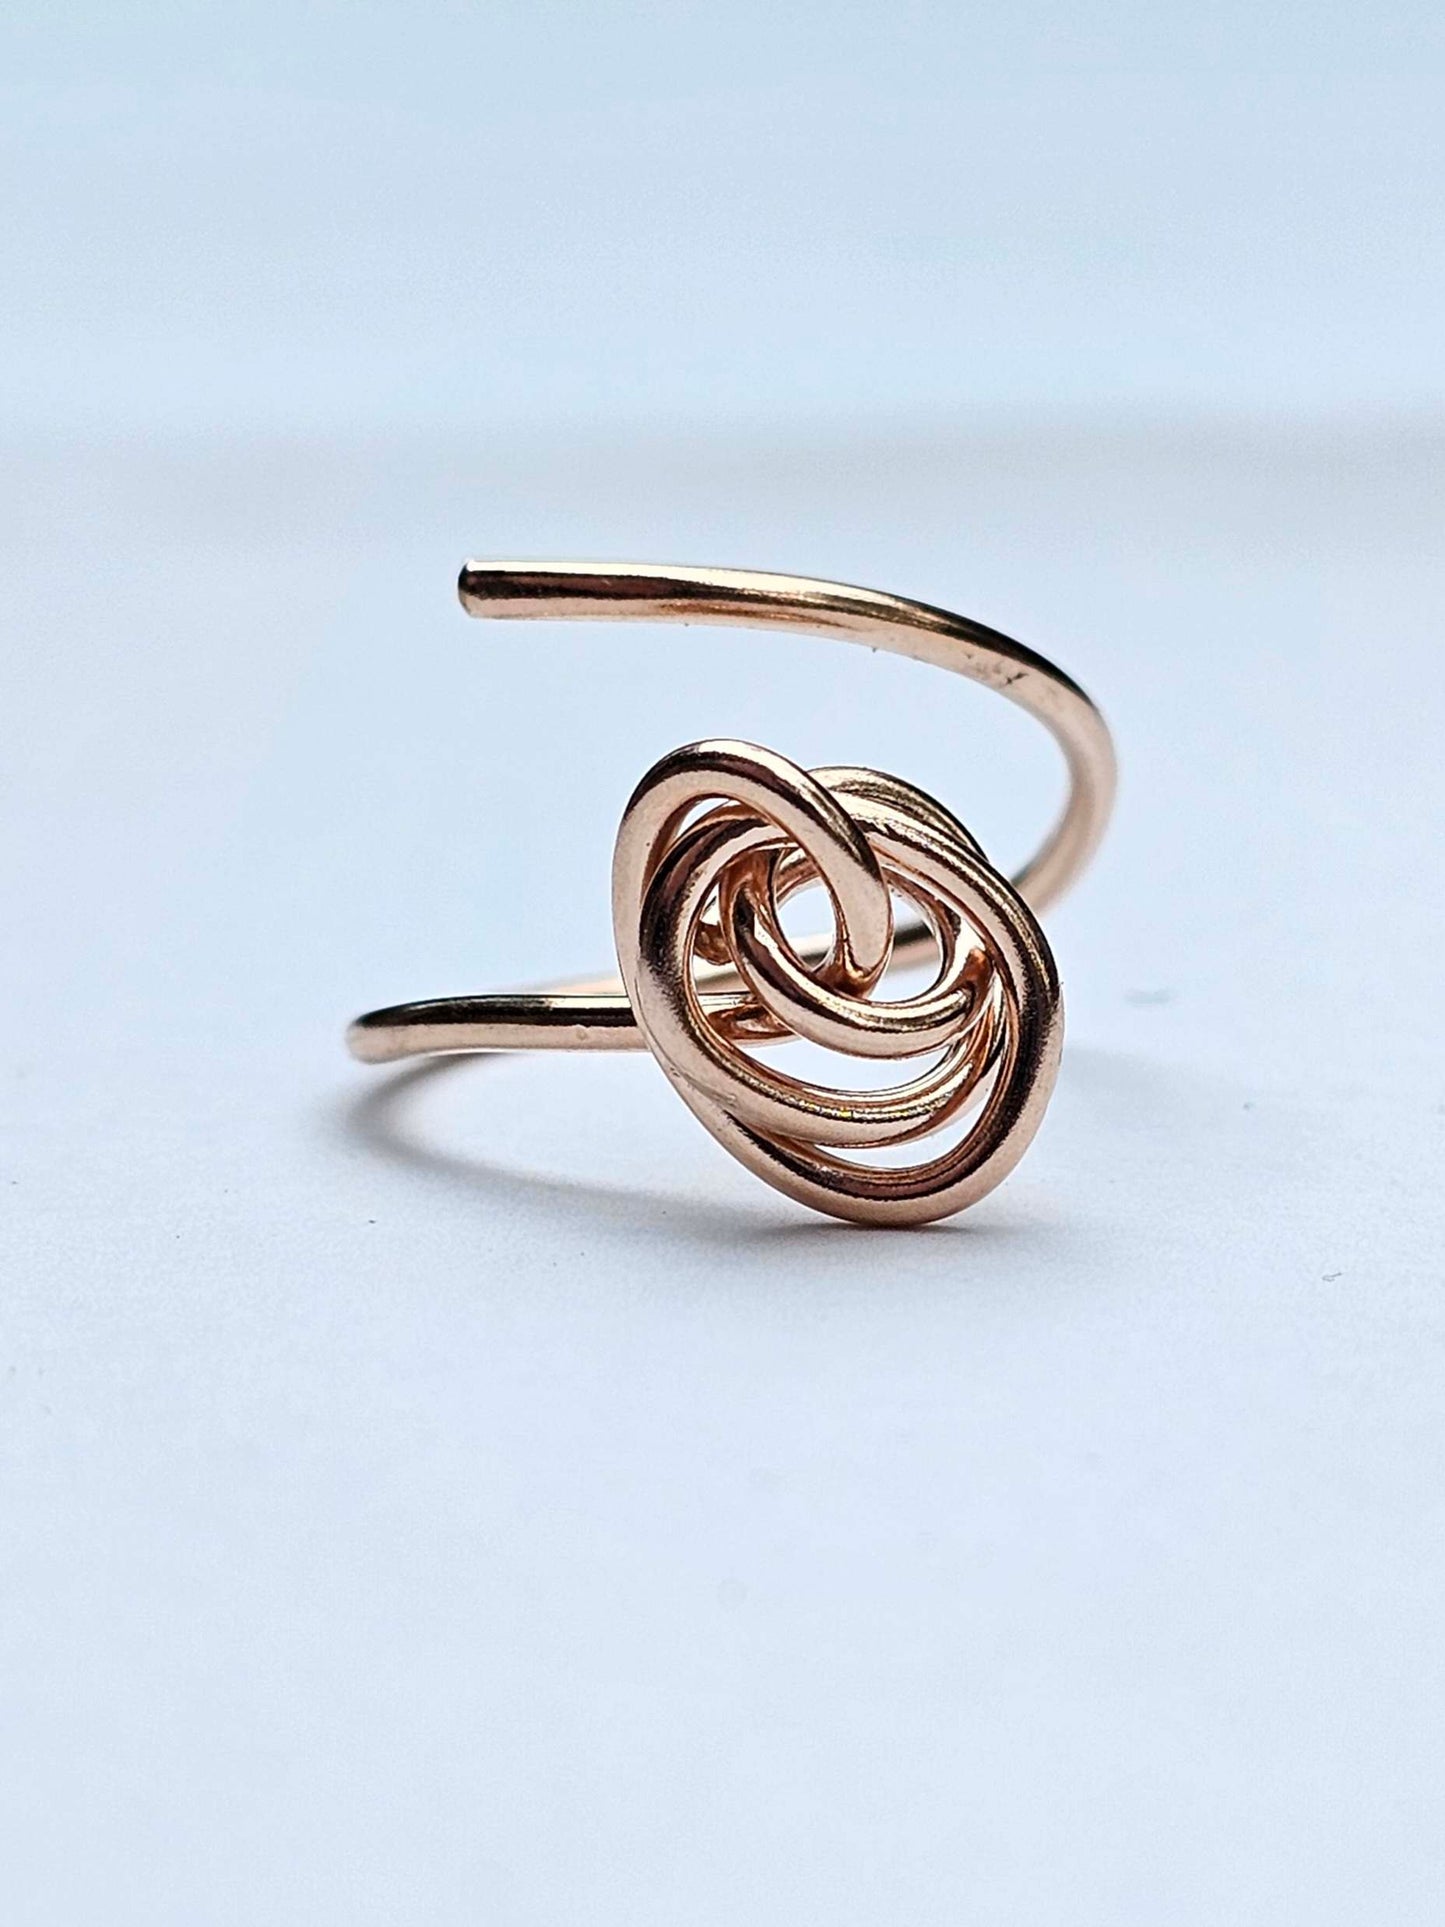 Adjustable Winding knot ring in 14K Rose Gold